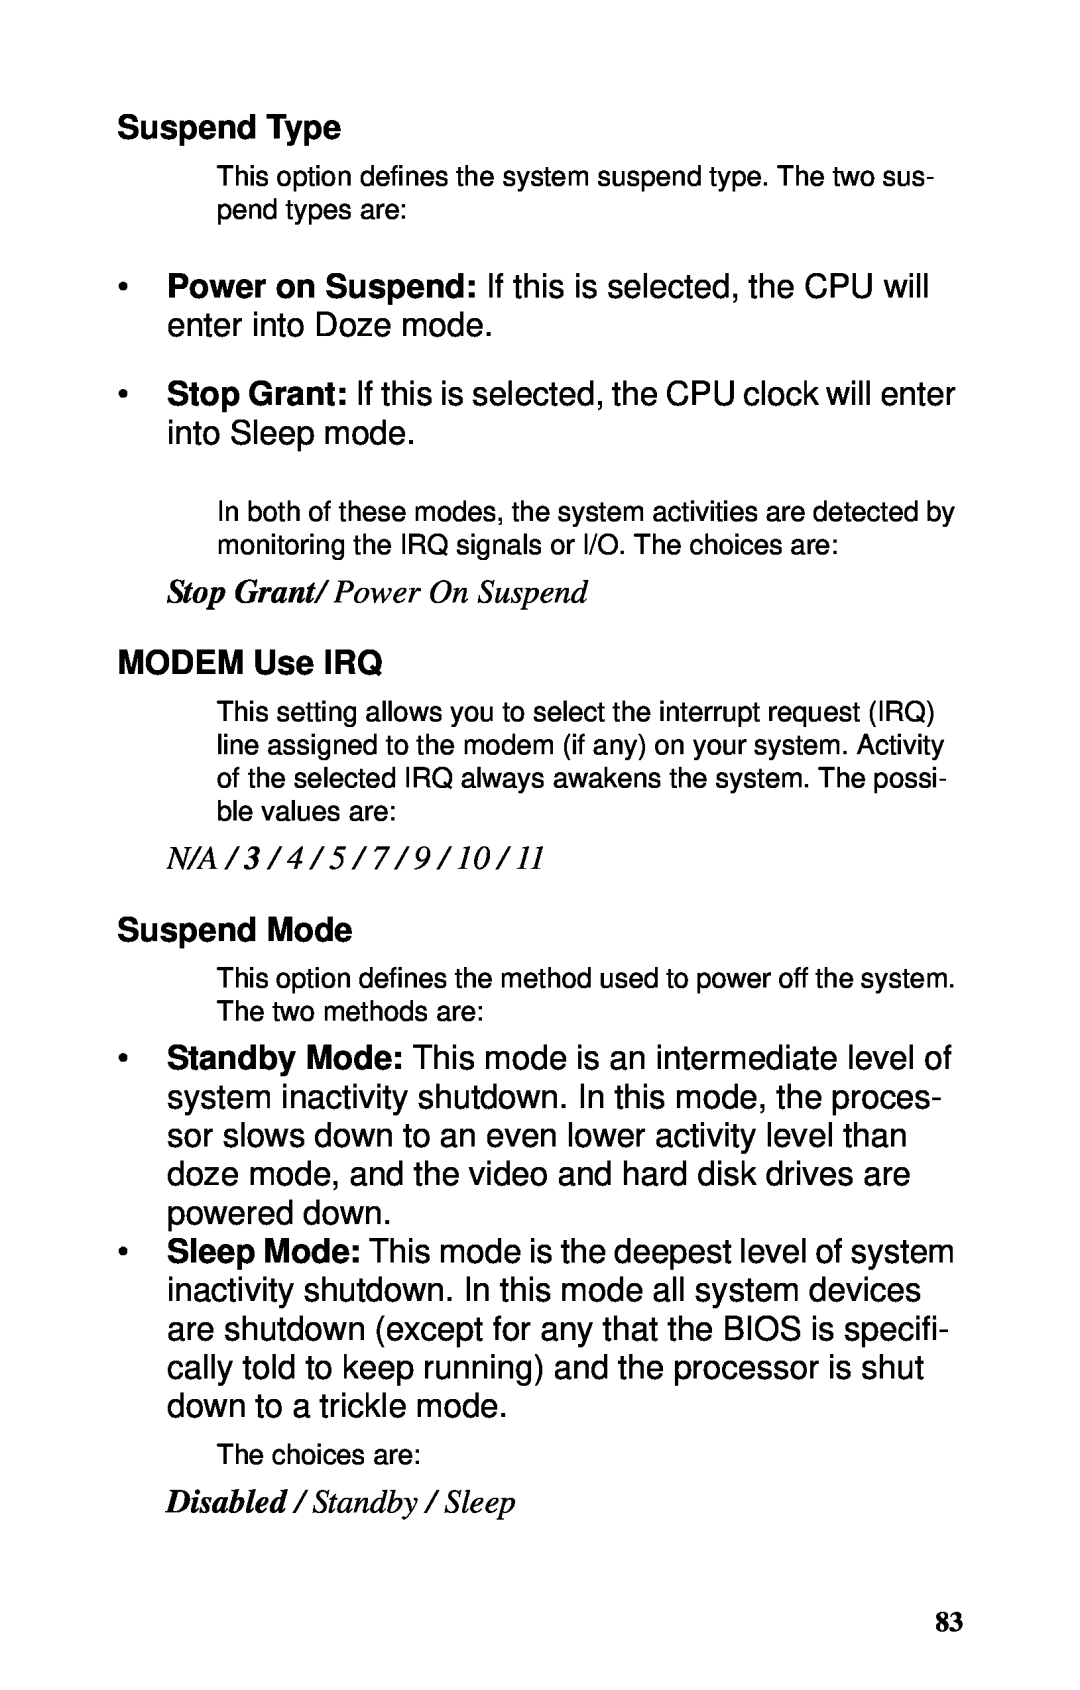 Tyan Computer GX21 Suspend Type, Stop Grant/ Power On Suspend, MODEM Use IRQ, N/A / 3 / 4 / 5 / 7 / 9 / 10, Suspend Mode 